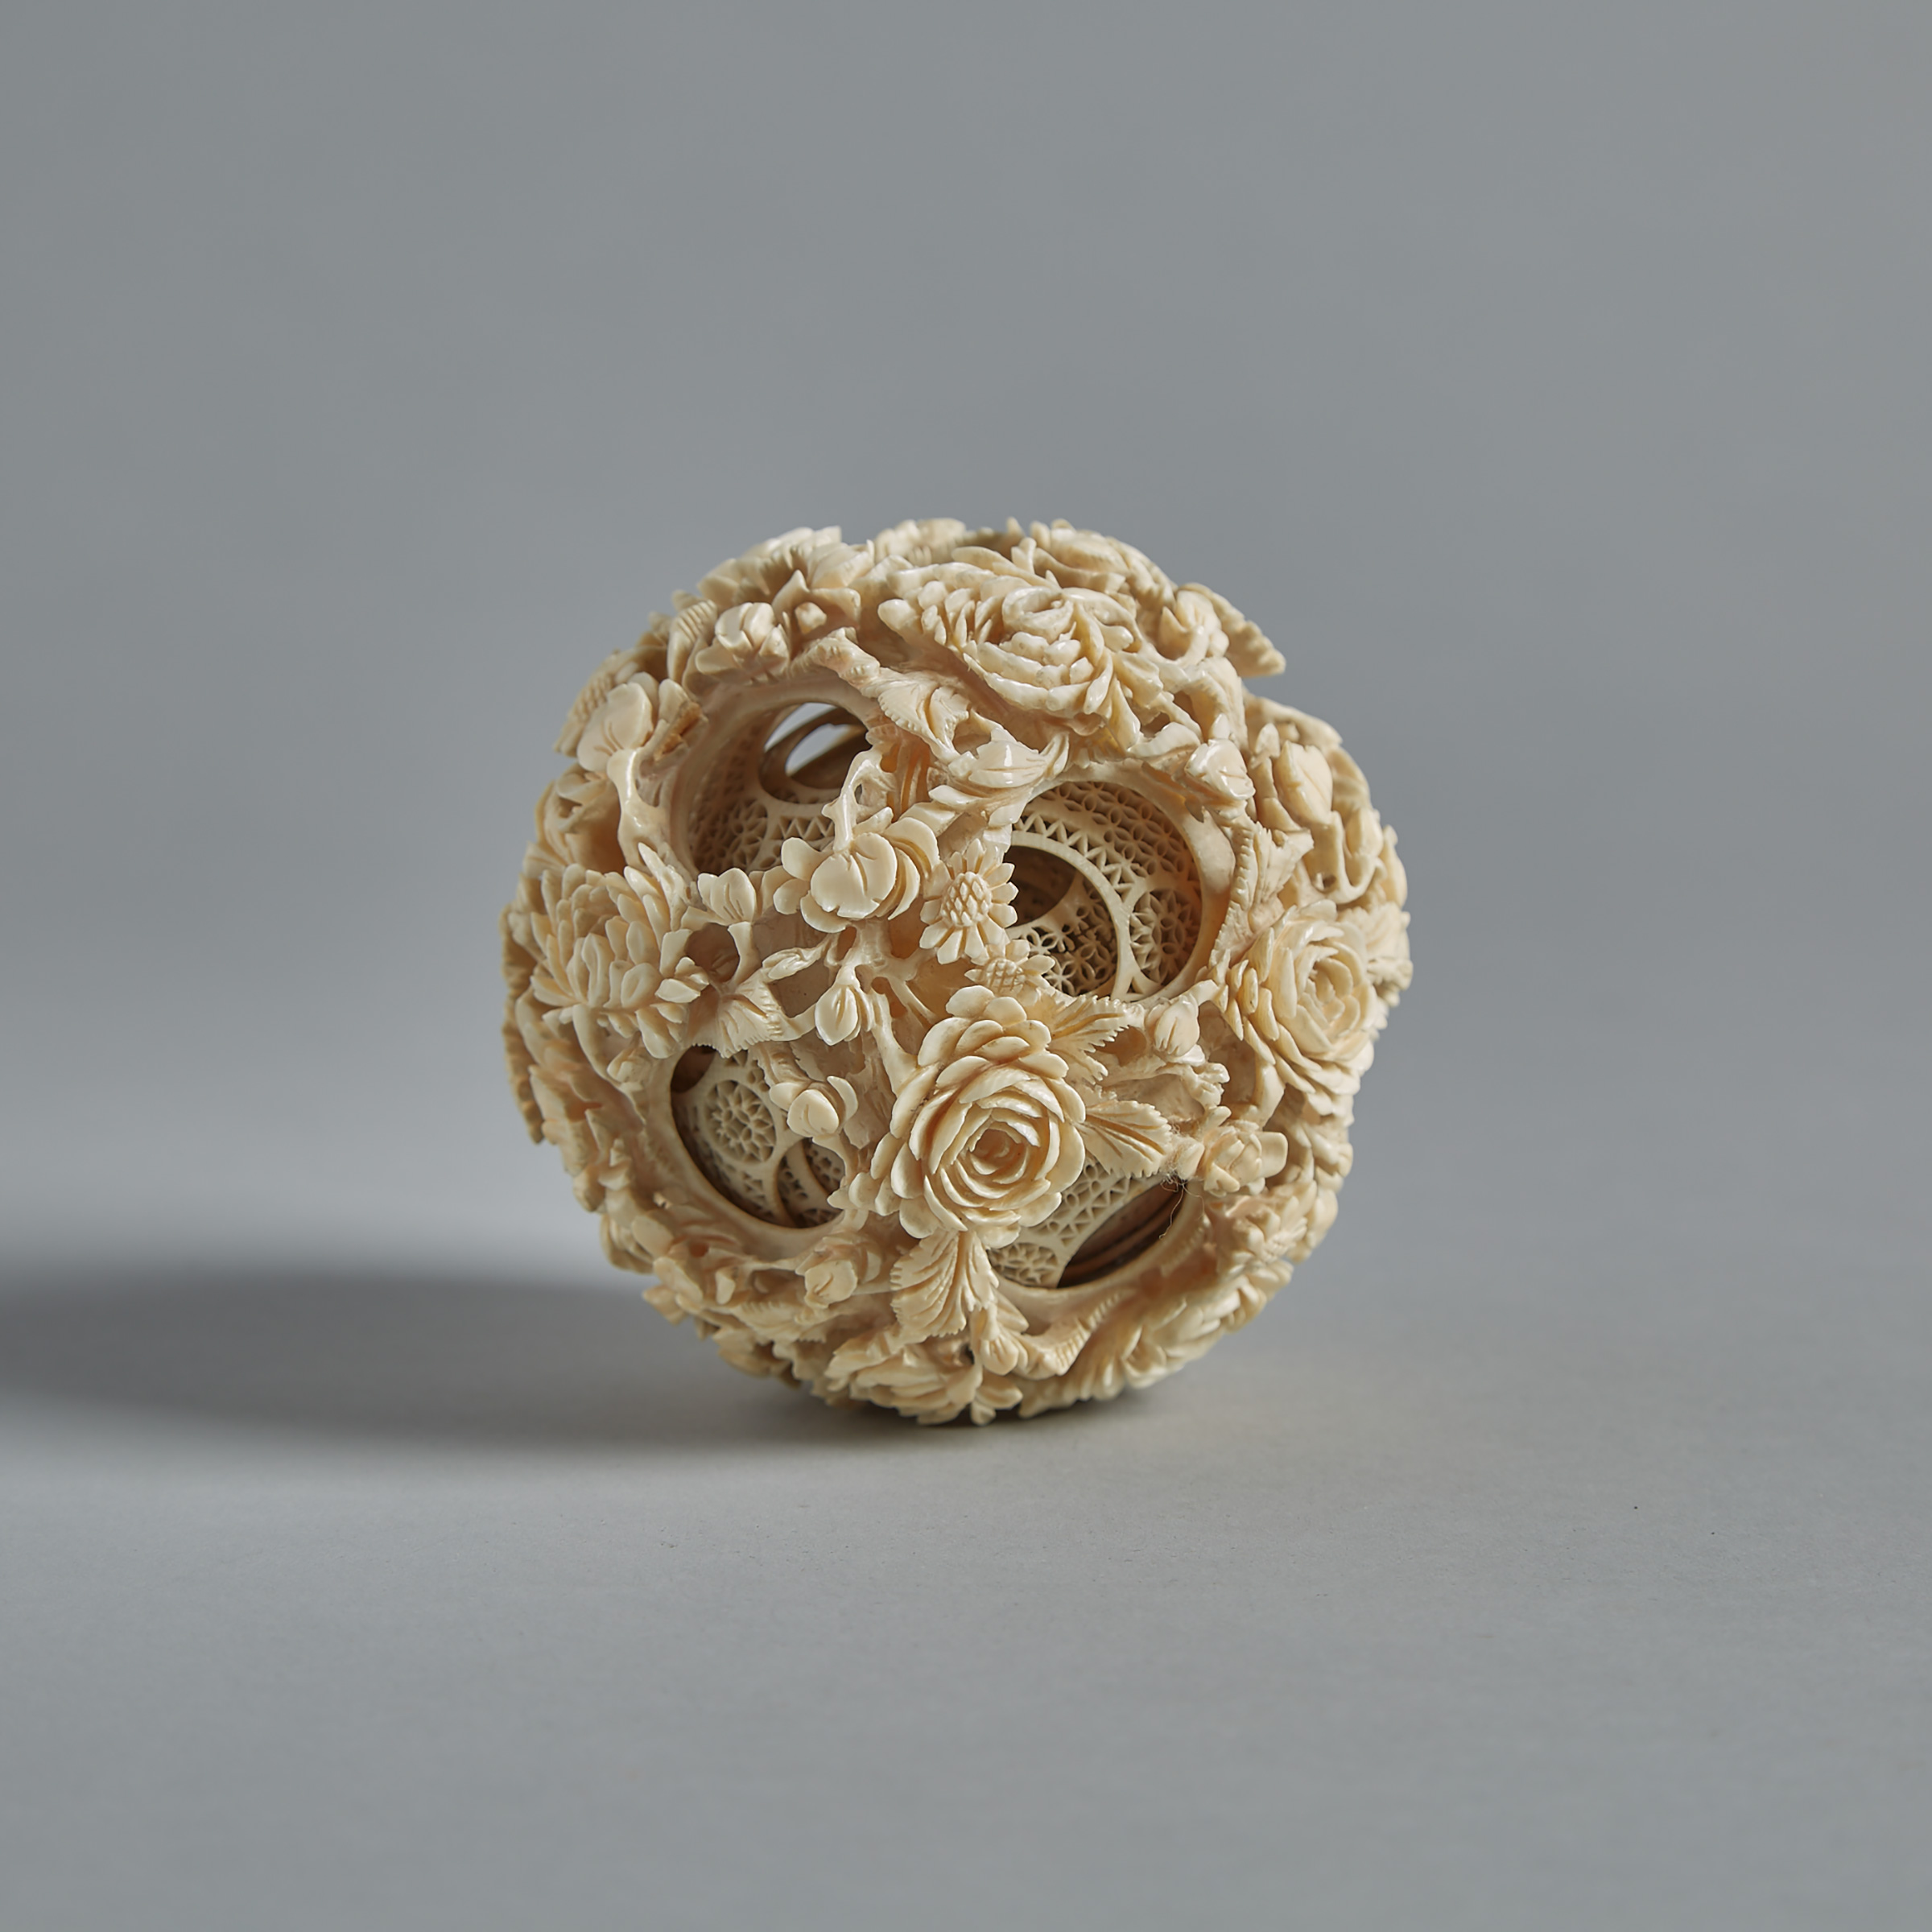 A Large Ivory Carved Puzzle Ball, Circa 1940